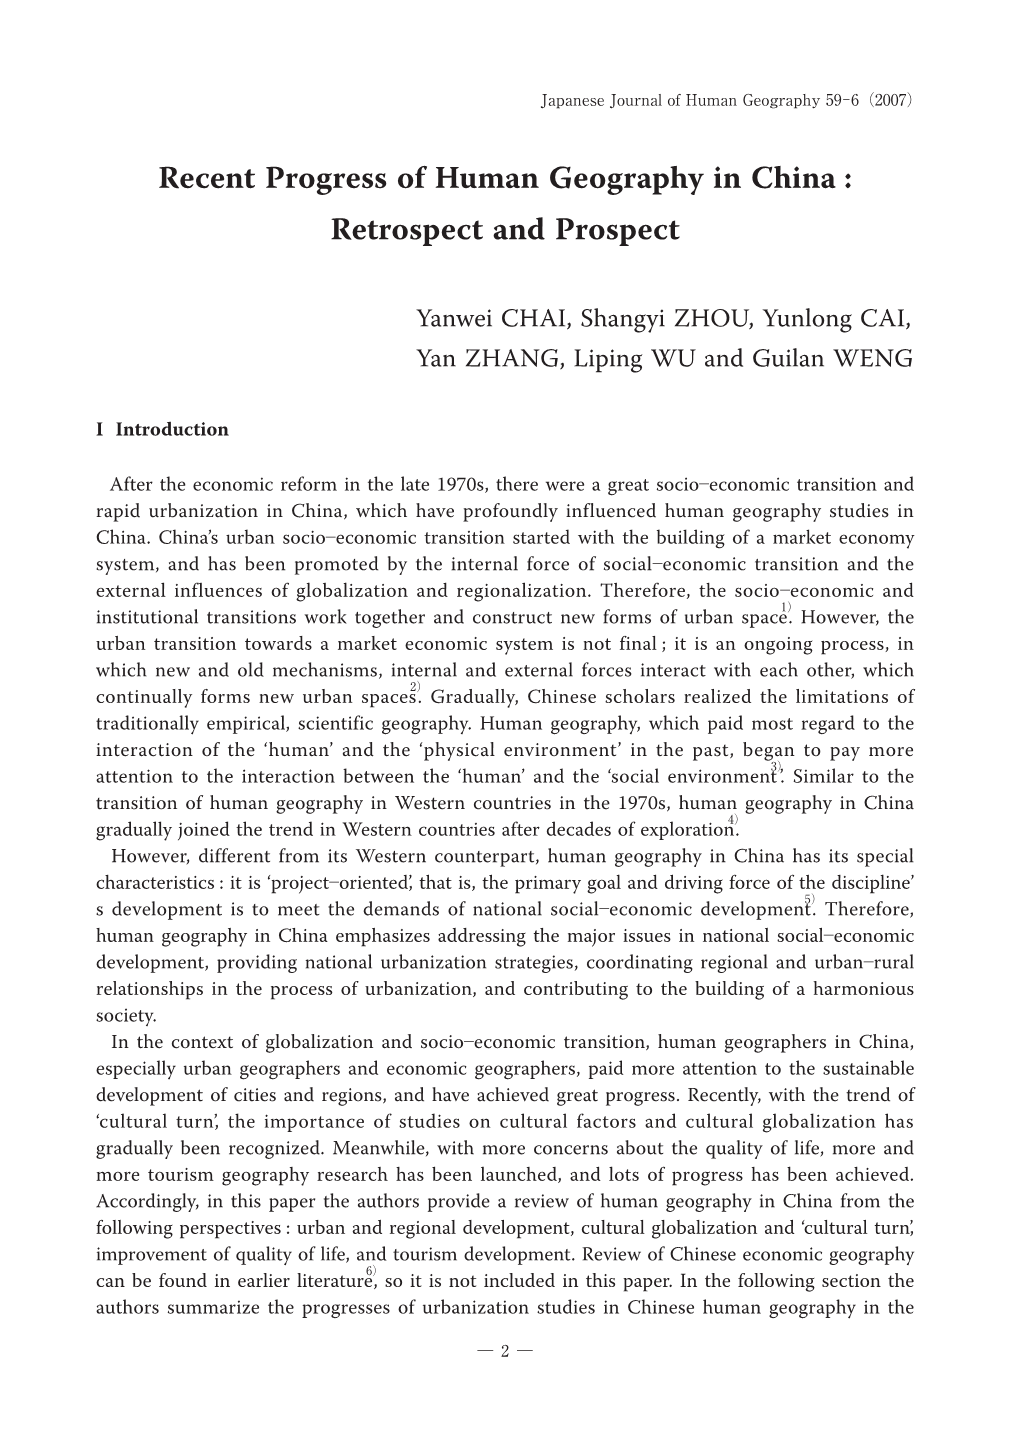 Recent Progress of Human Geography in China : Retrospect and Prospect